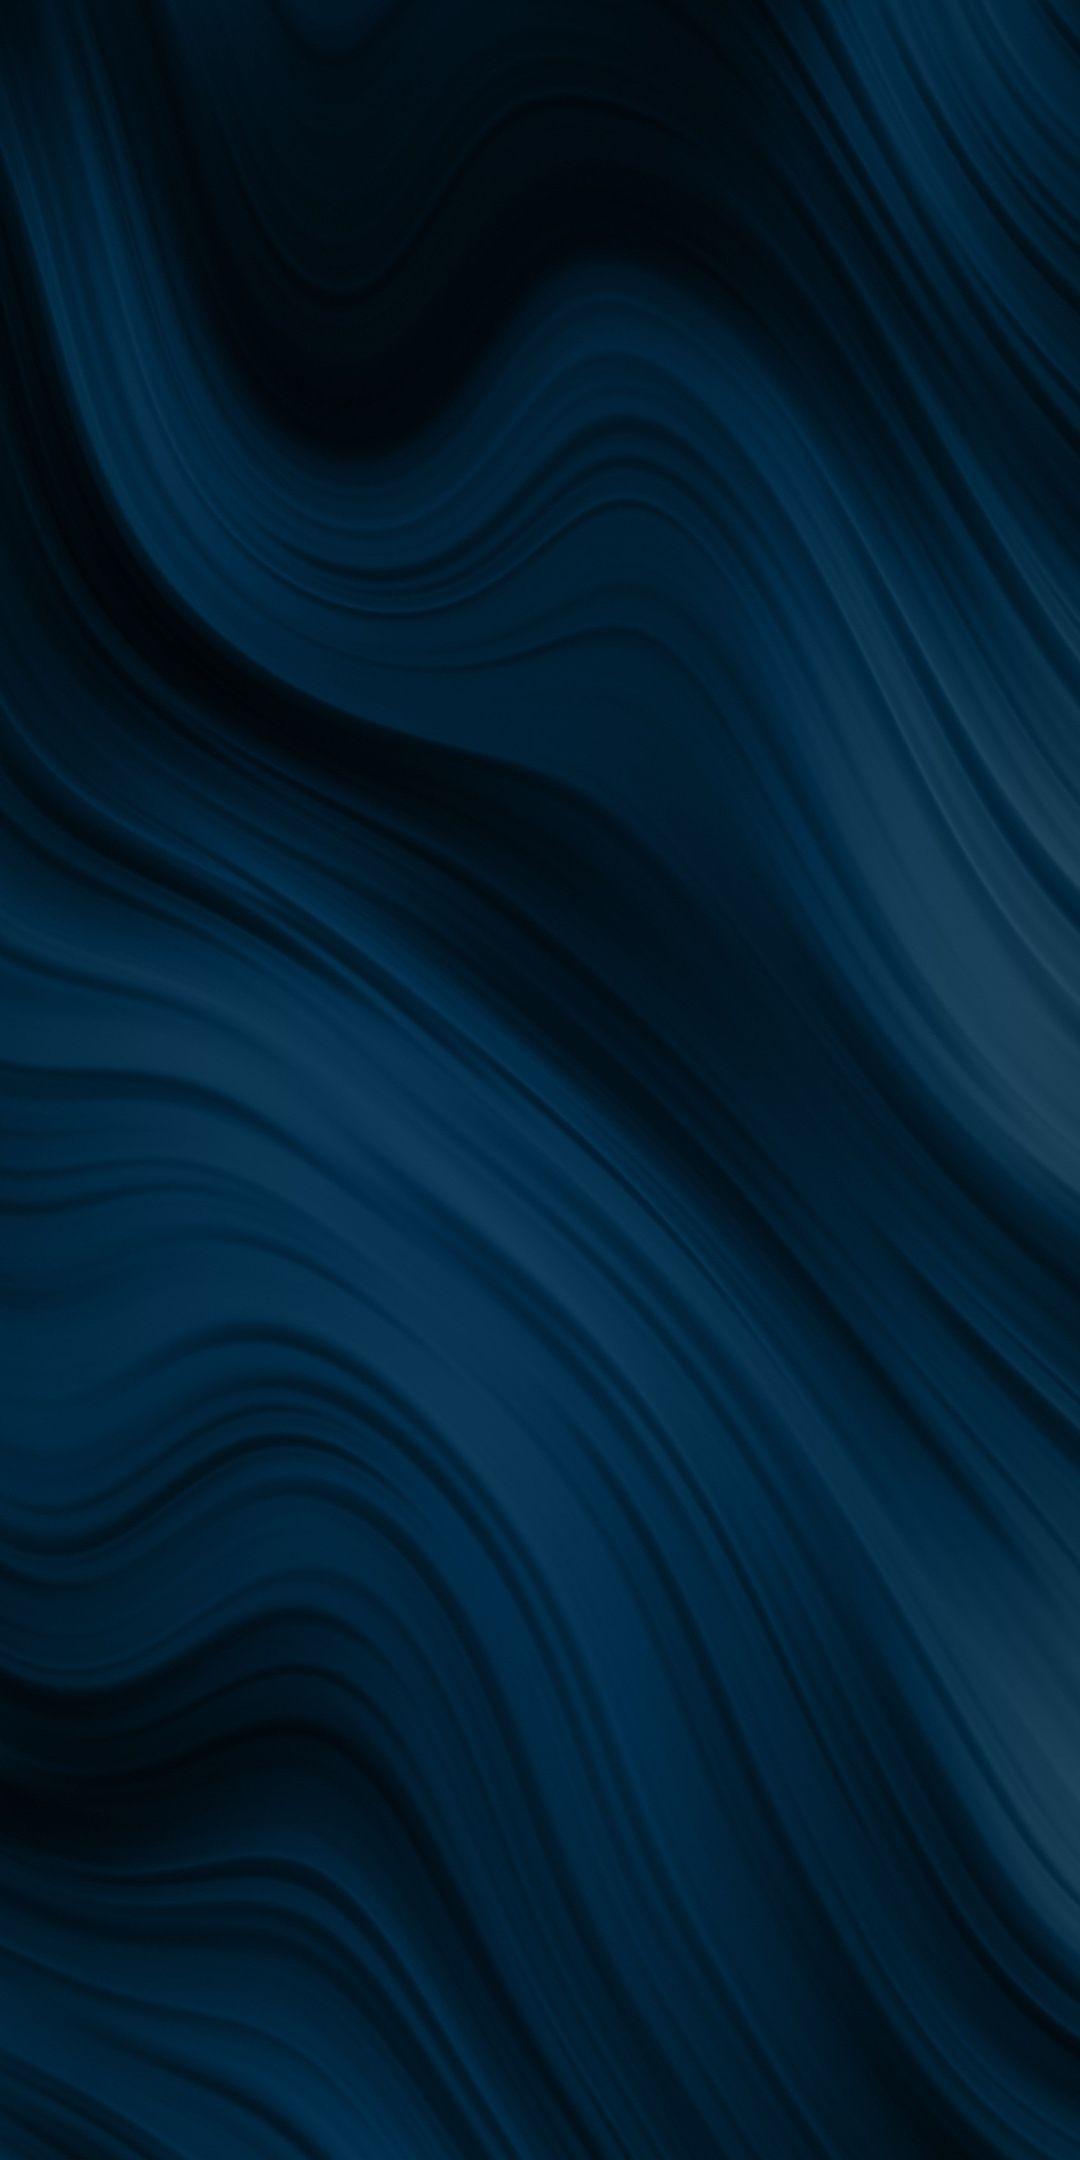 Dark, curvy lines, waves, abstract, wallpapers